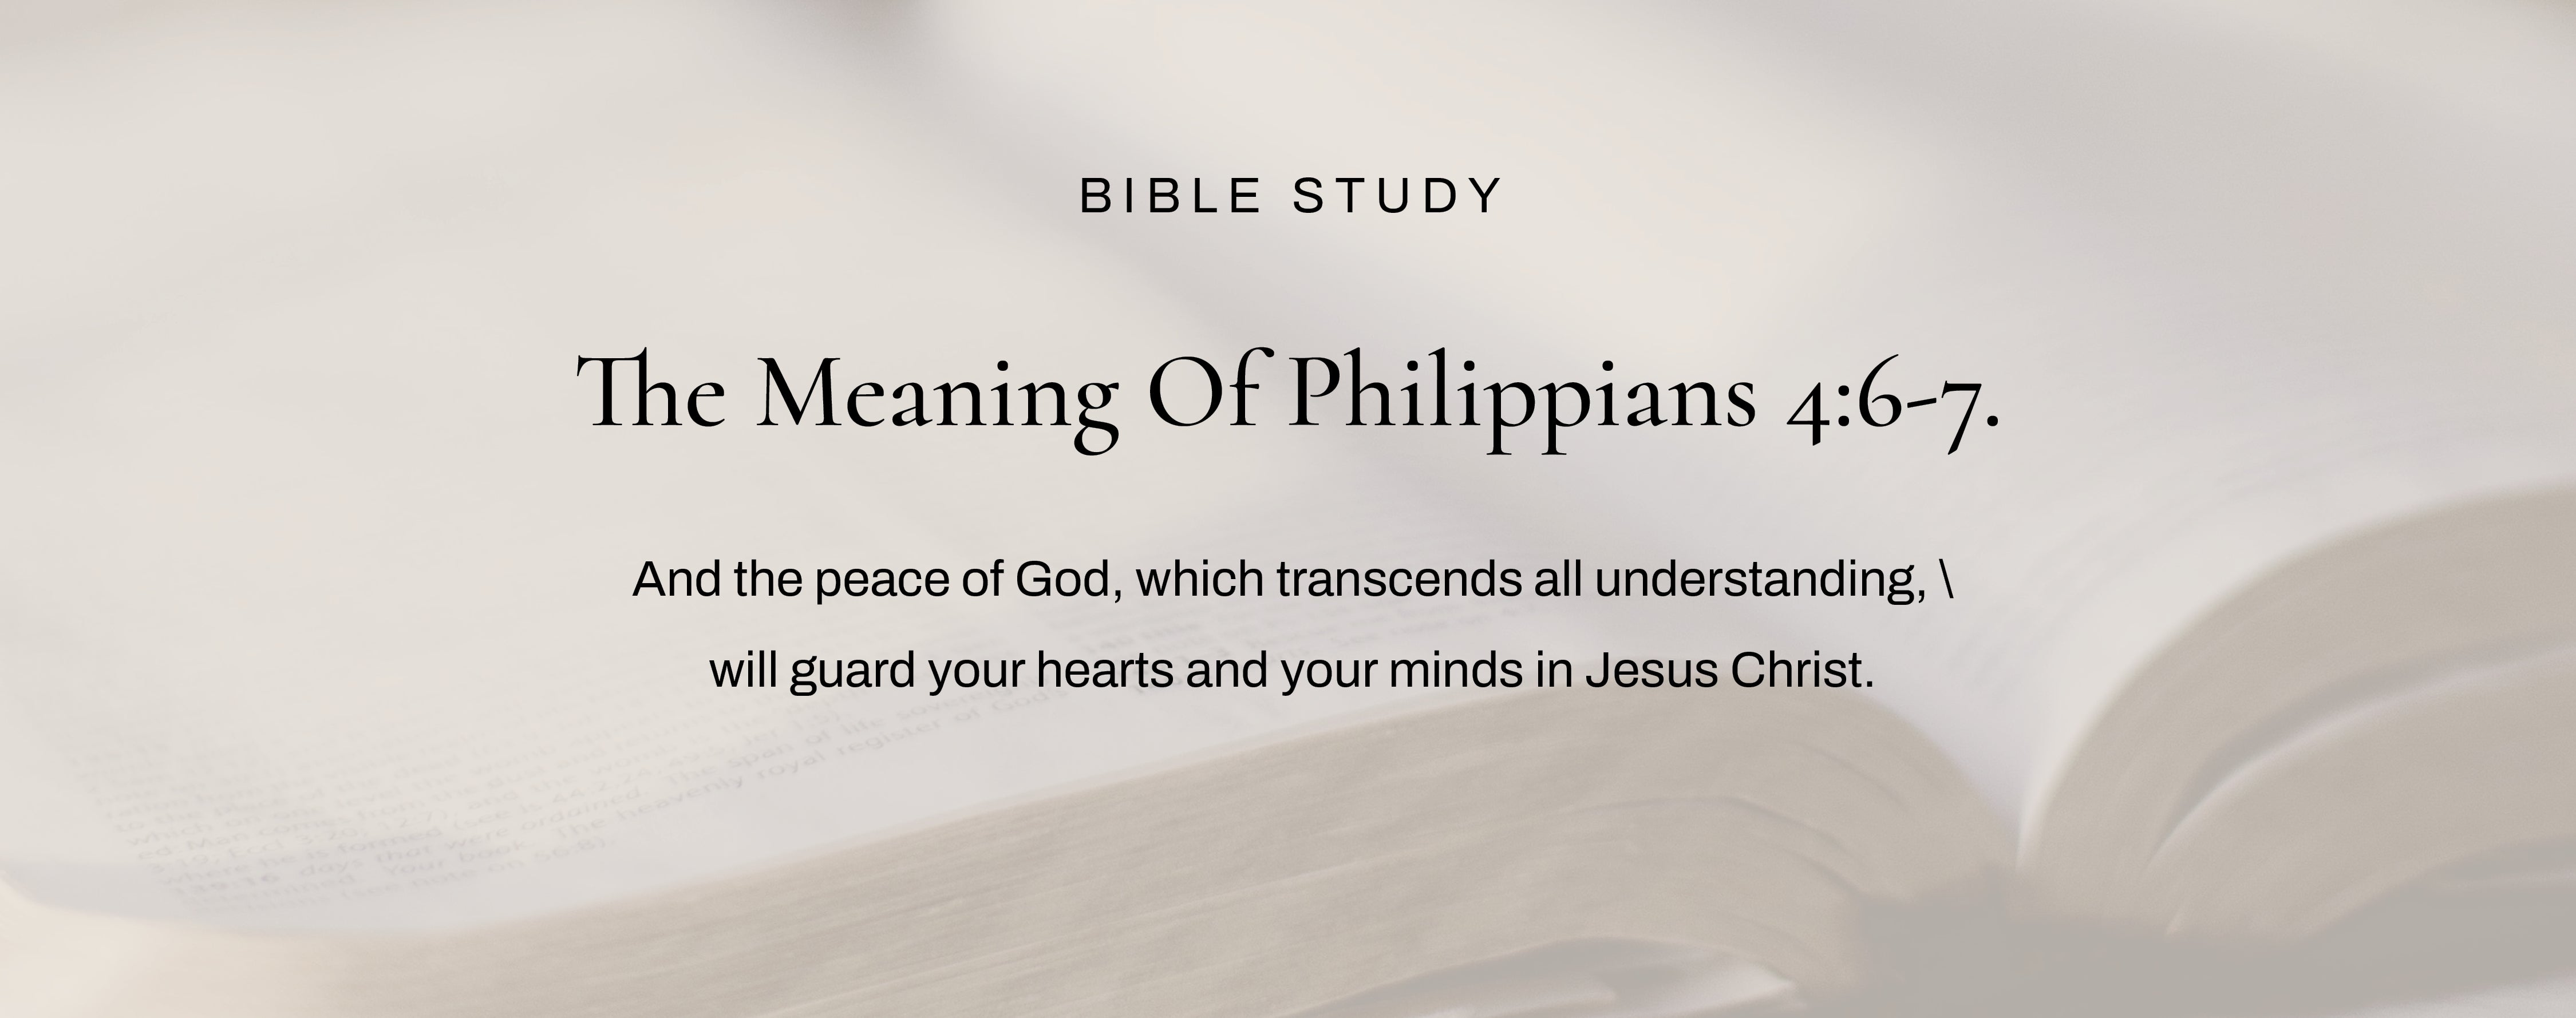 Verse of the Day - Philippians 4:6